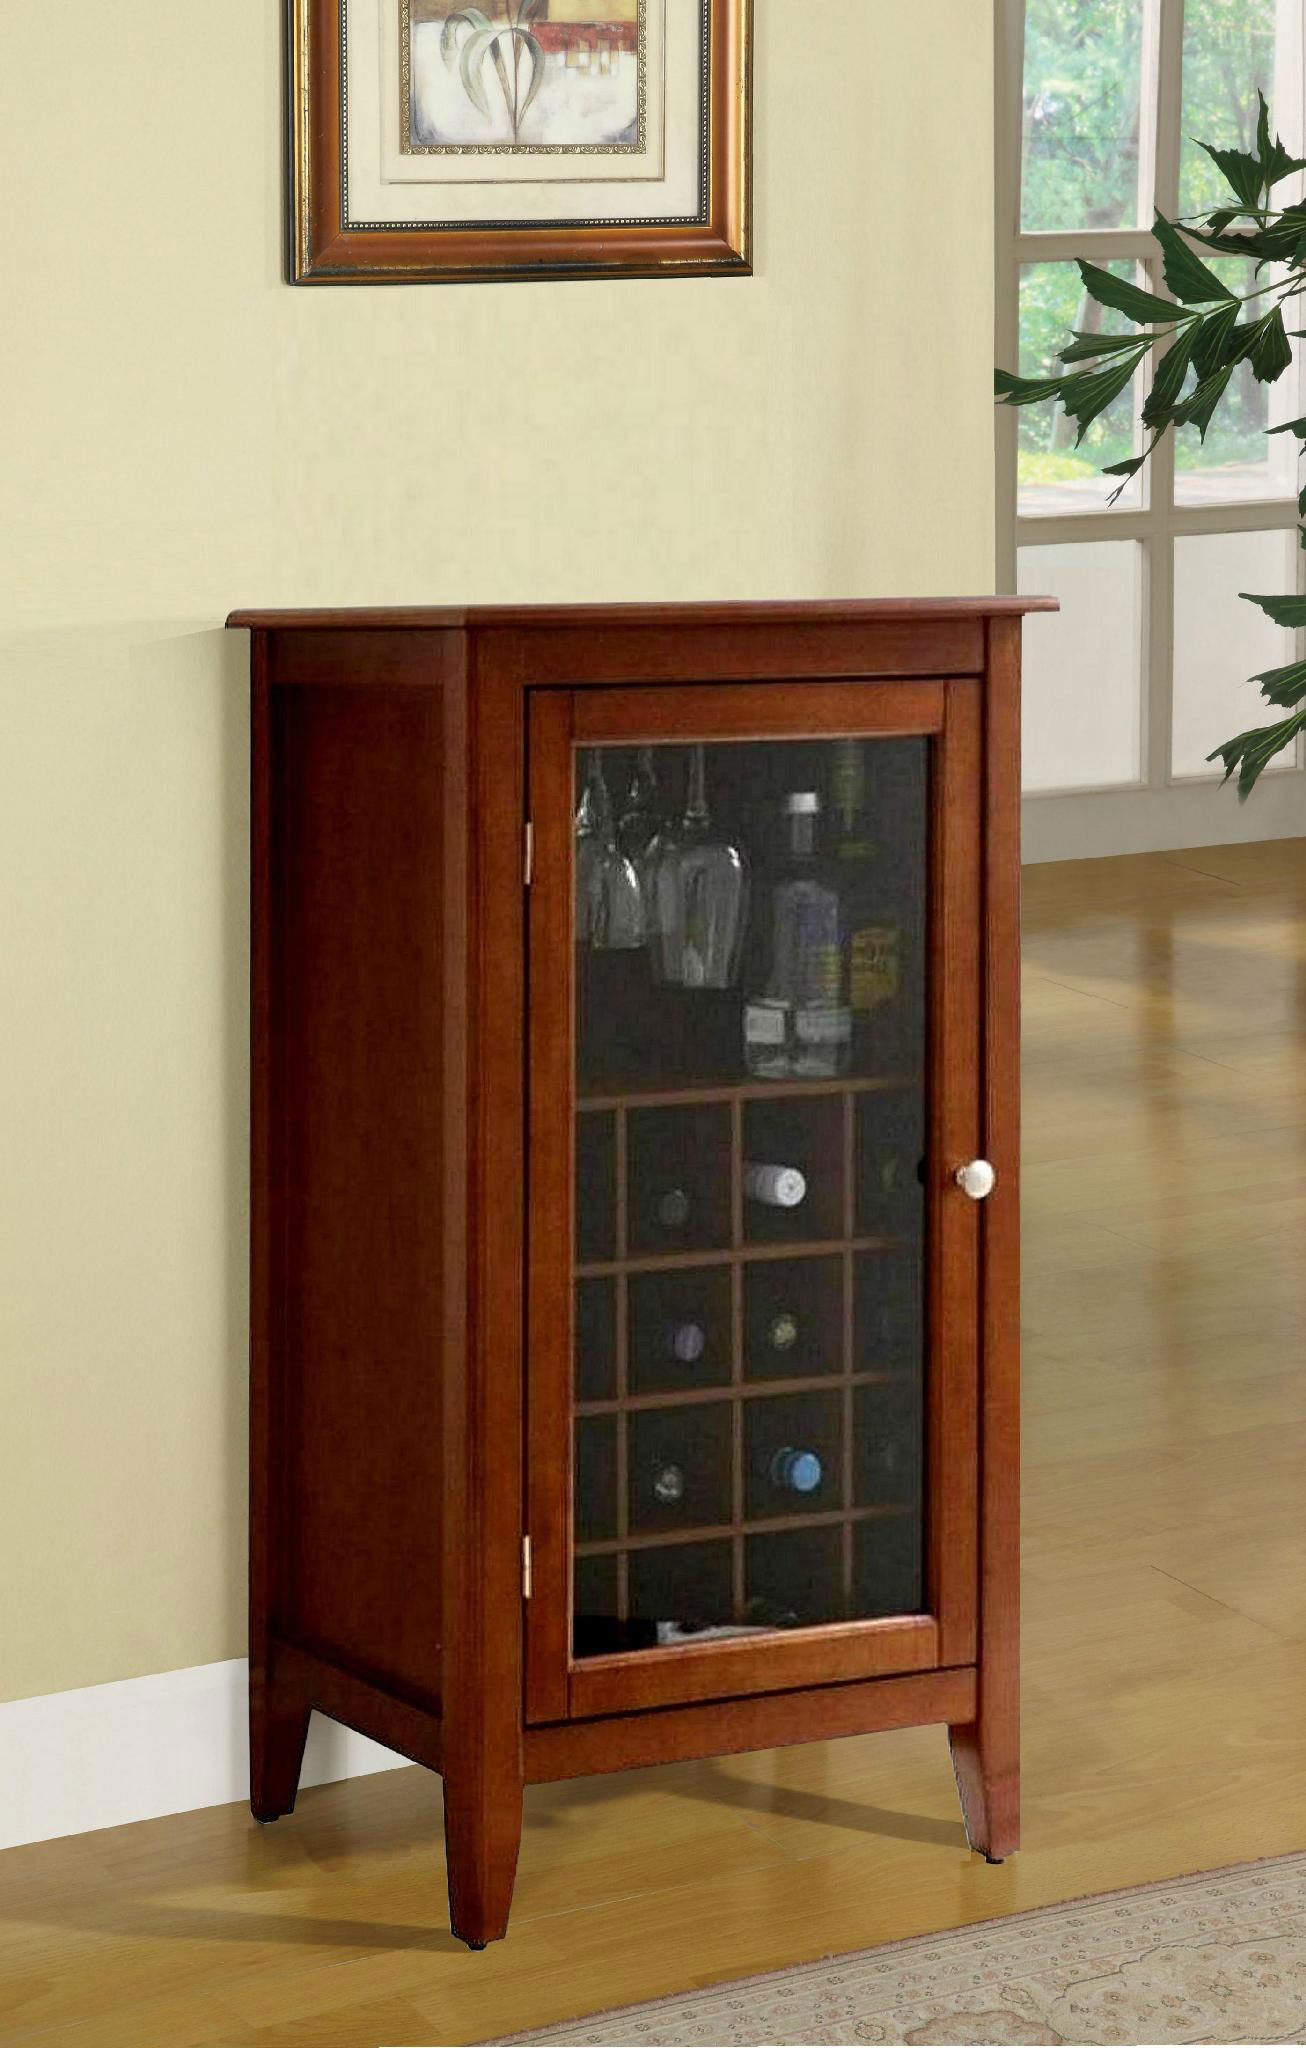 16 Bottles Modern Home Bars And Wine Storage Cabinet For Sale Wd